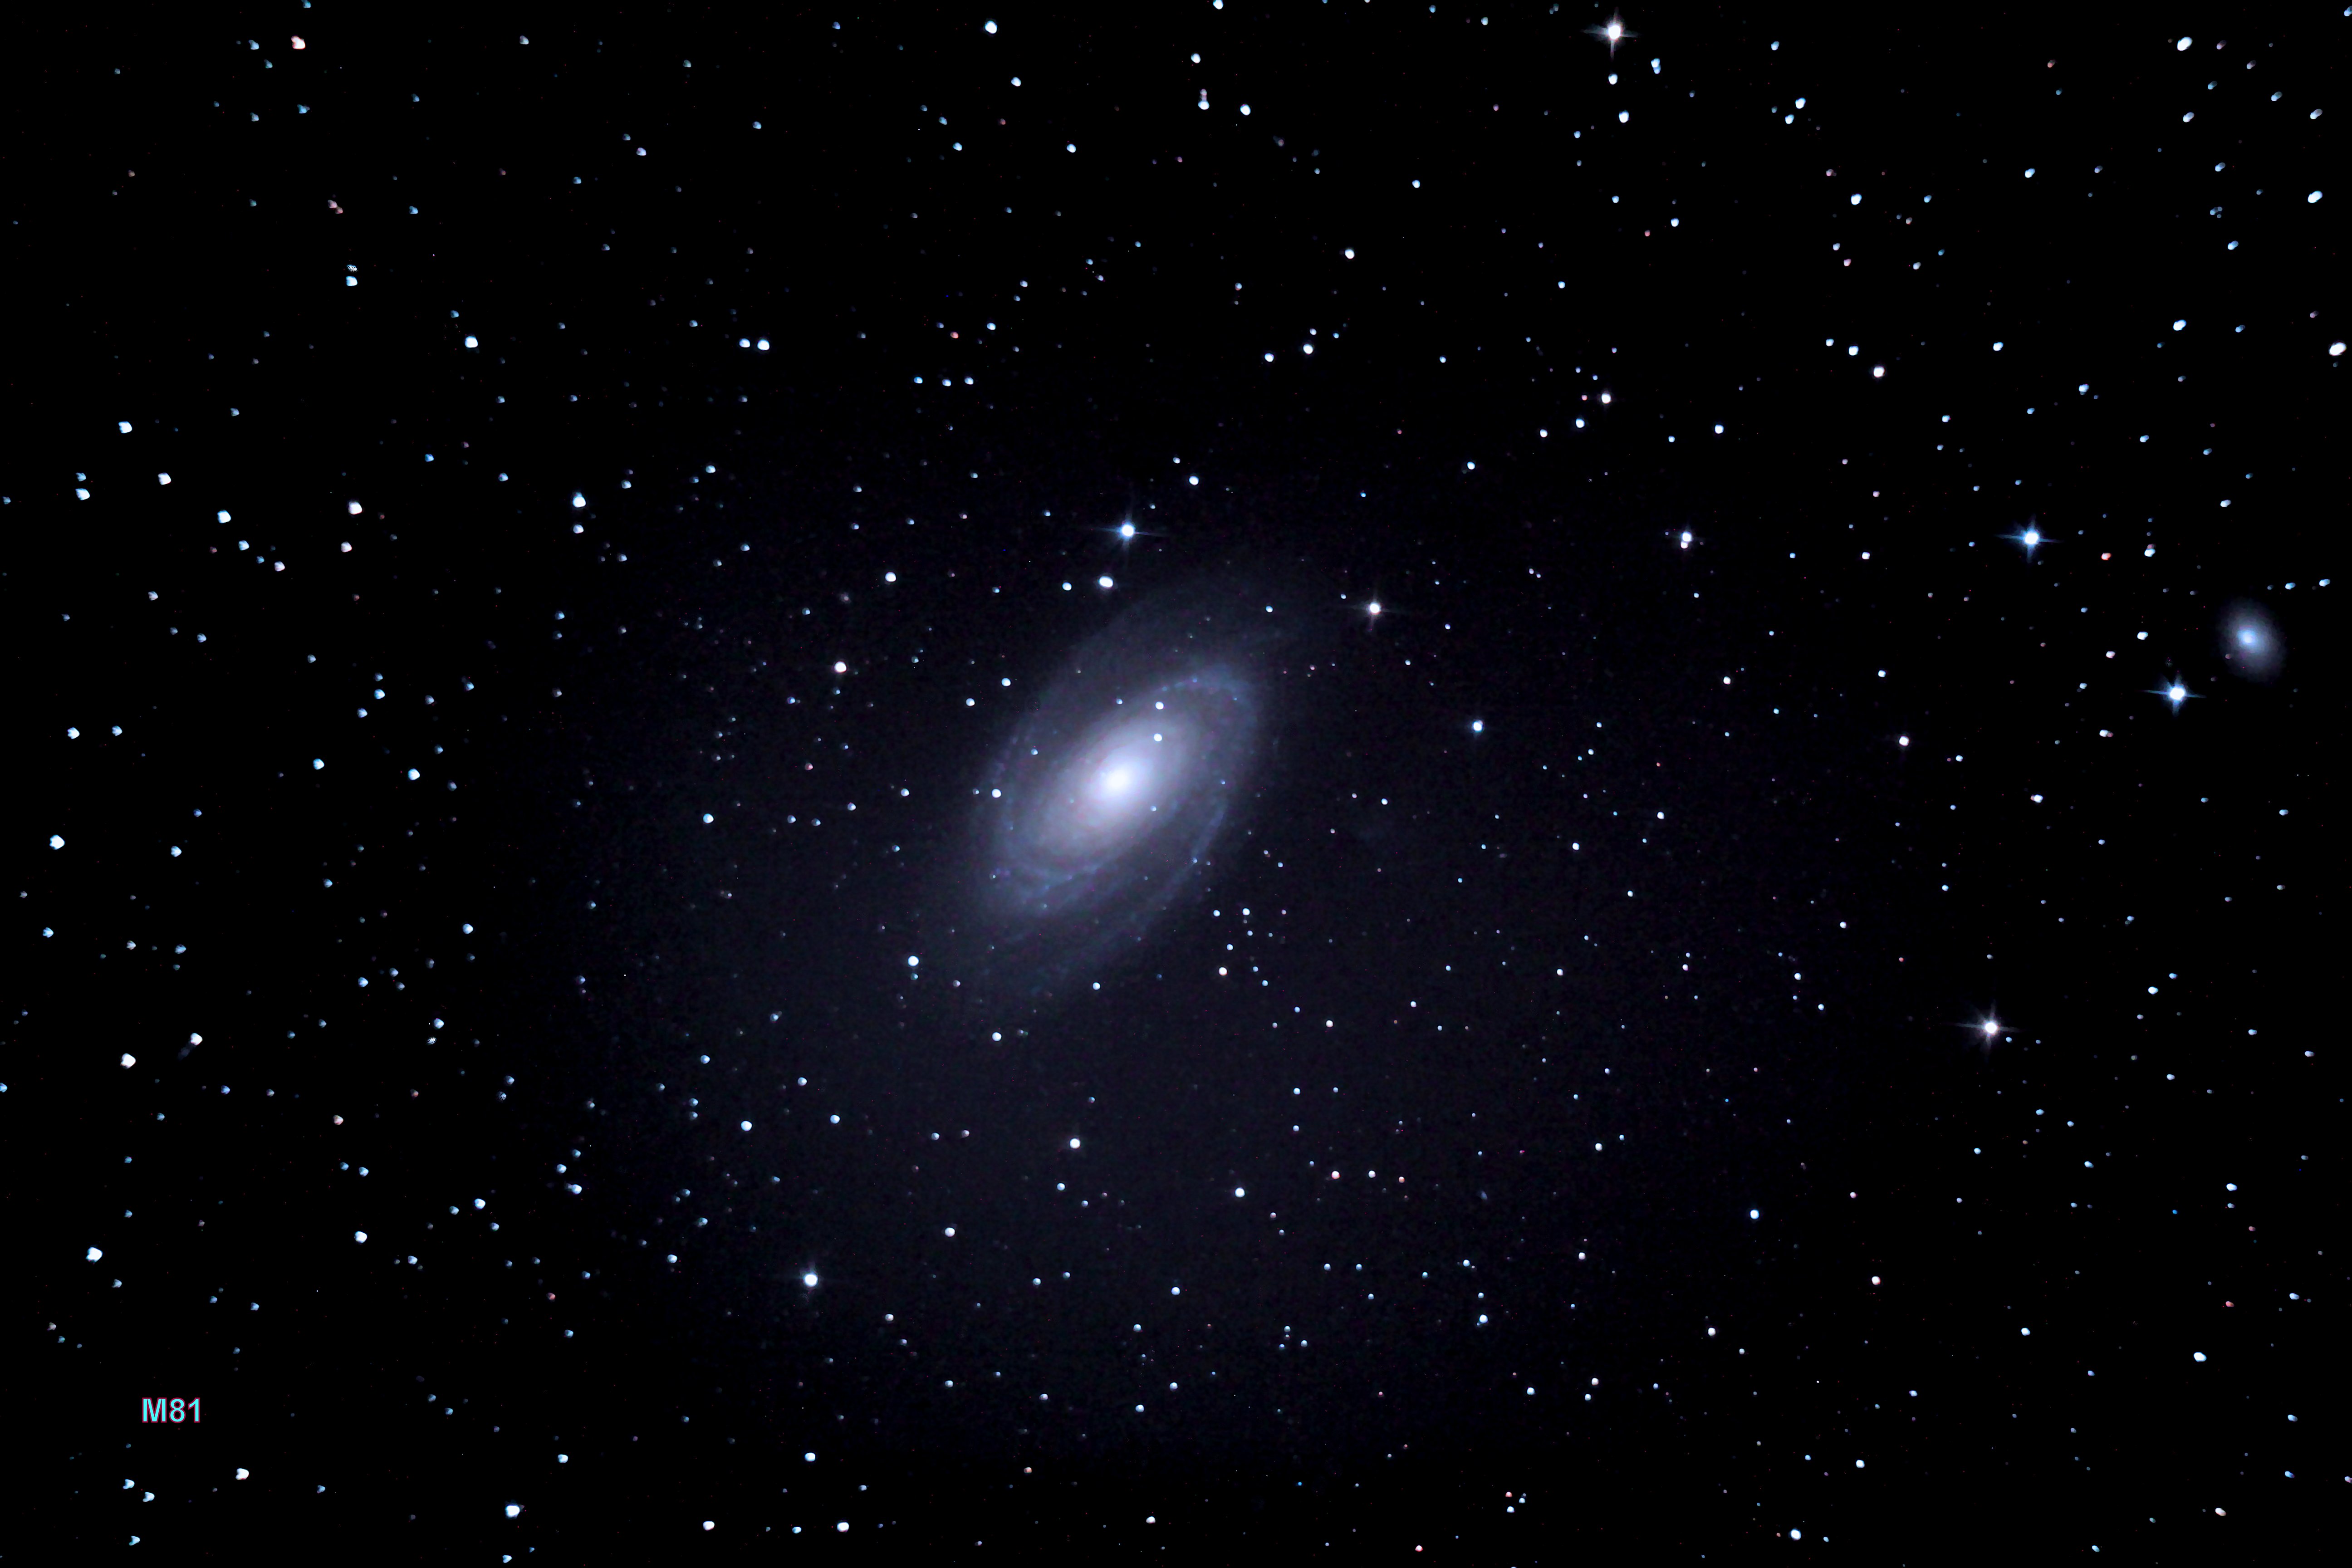 M81-2-5-18. Made with my new Orion 8 f/3.9 Newtonian Astrographs